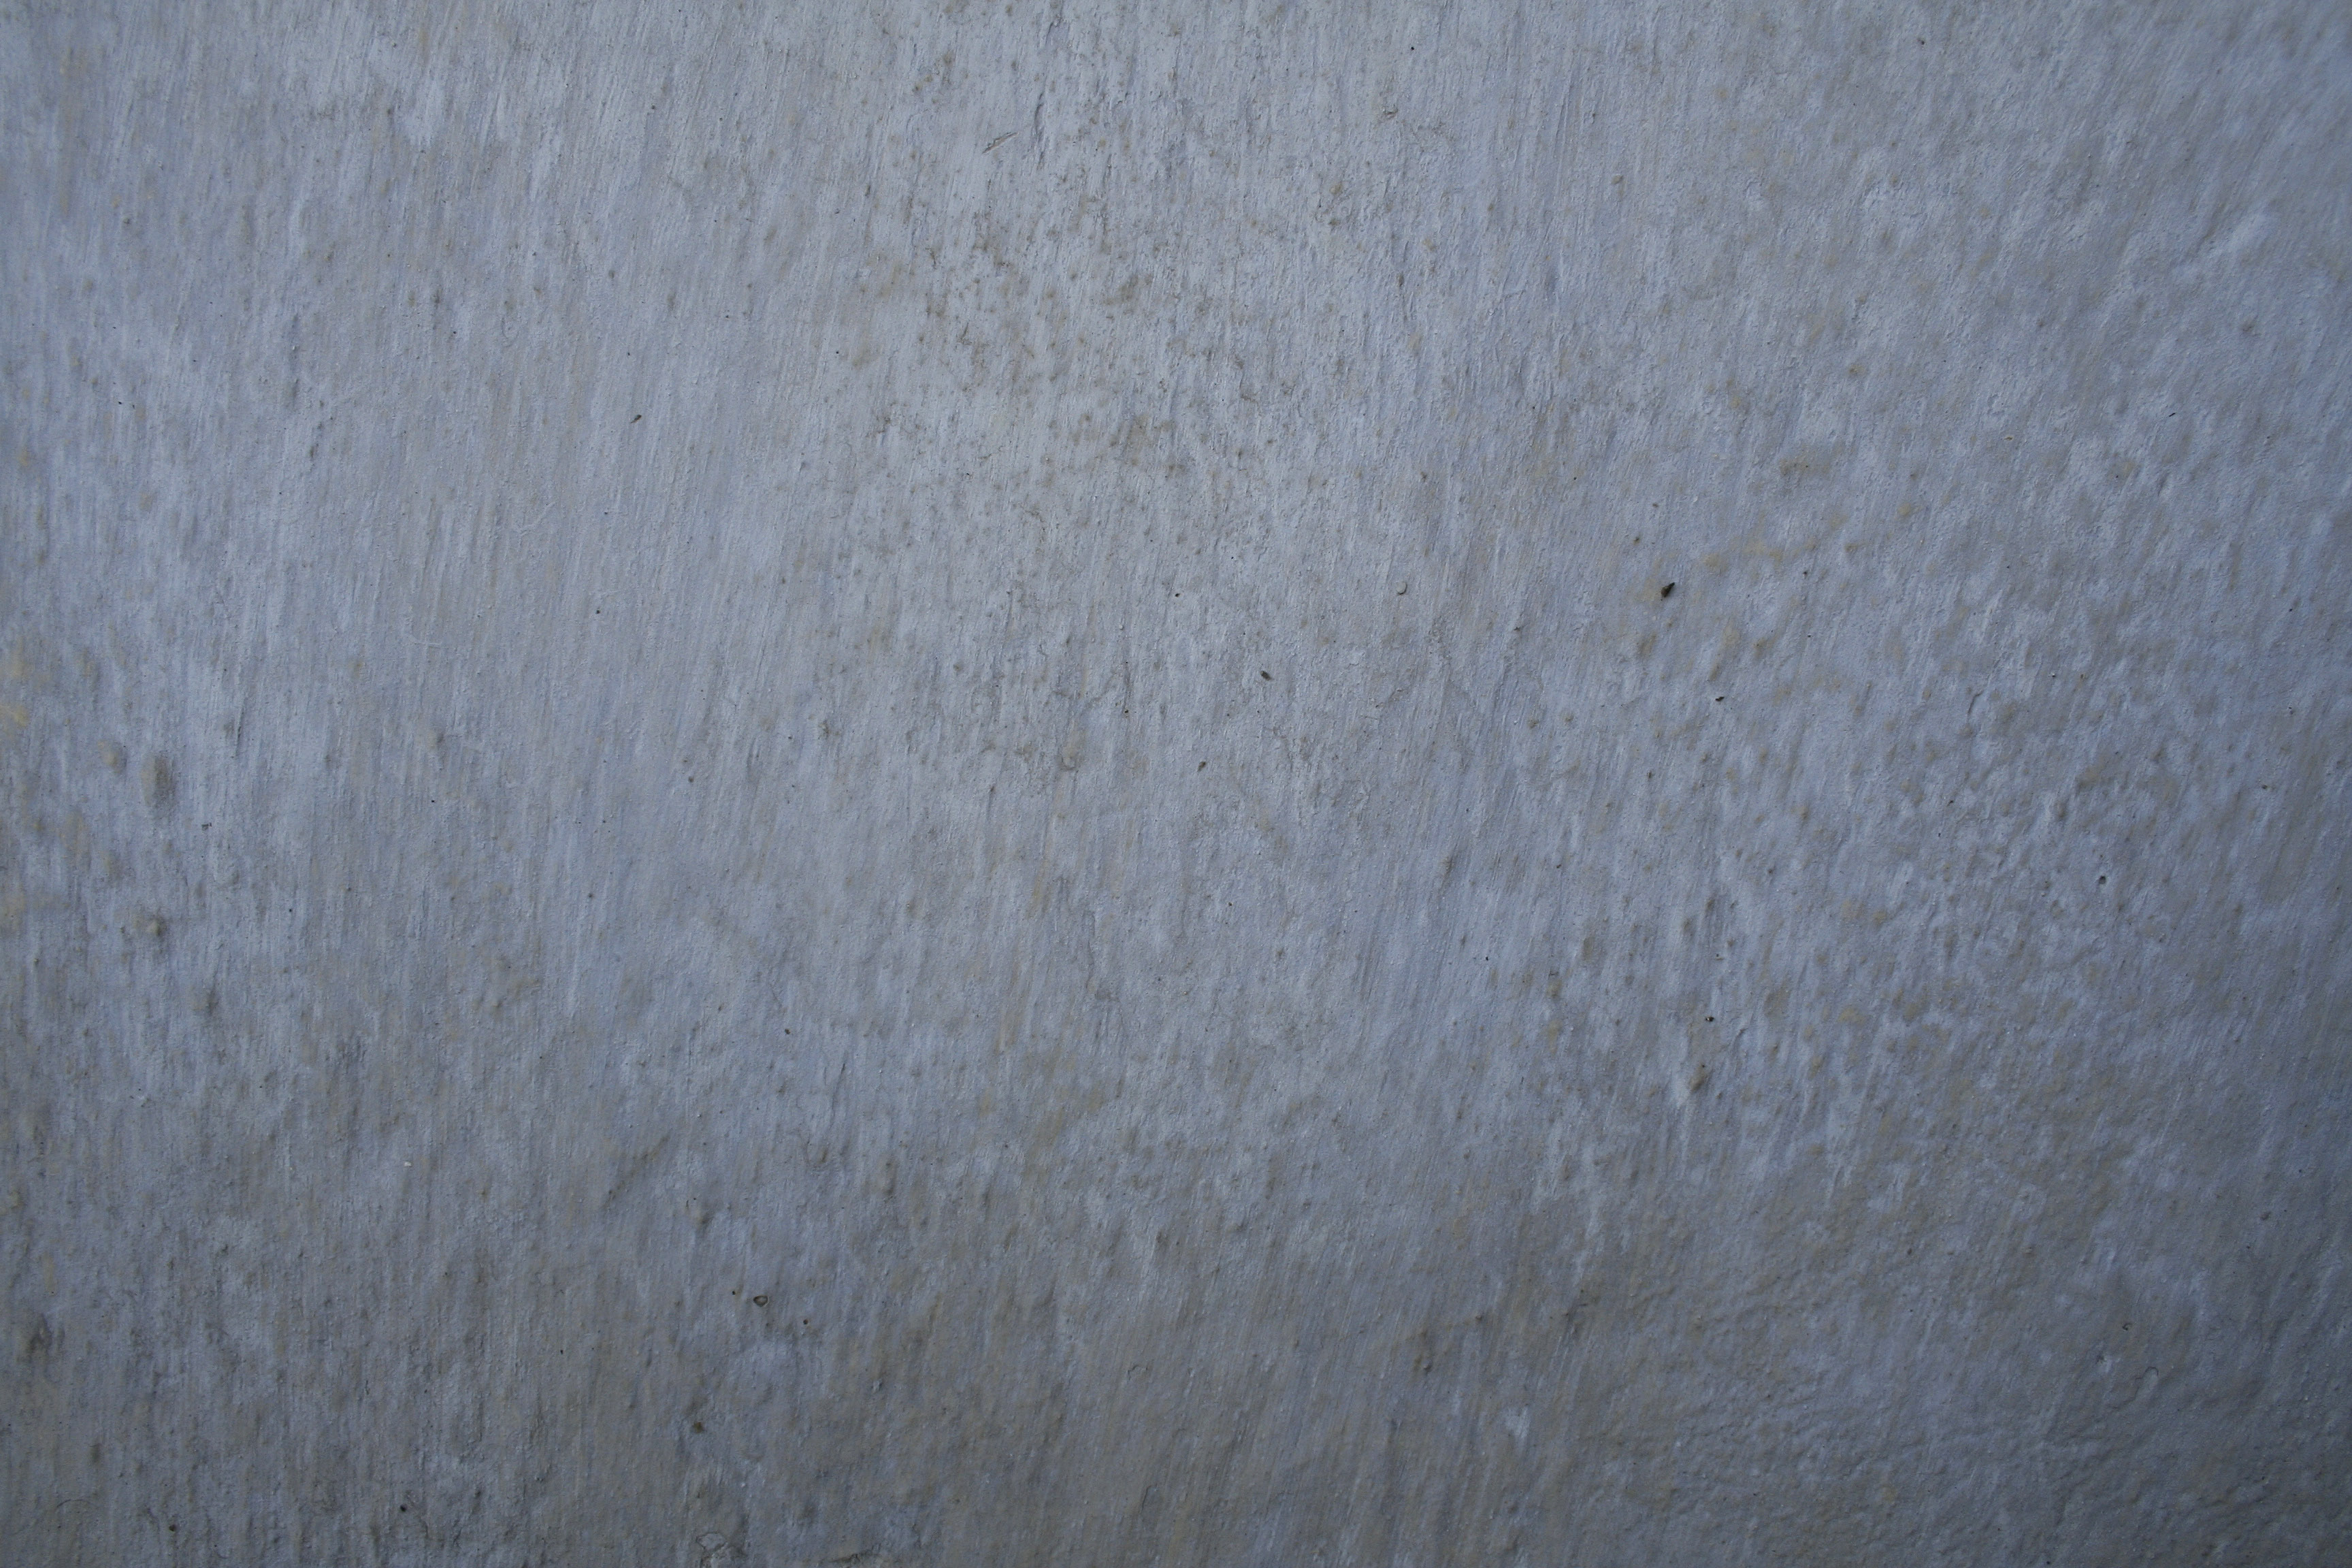 wall | Textures for photoshop free - Part 3